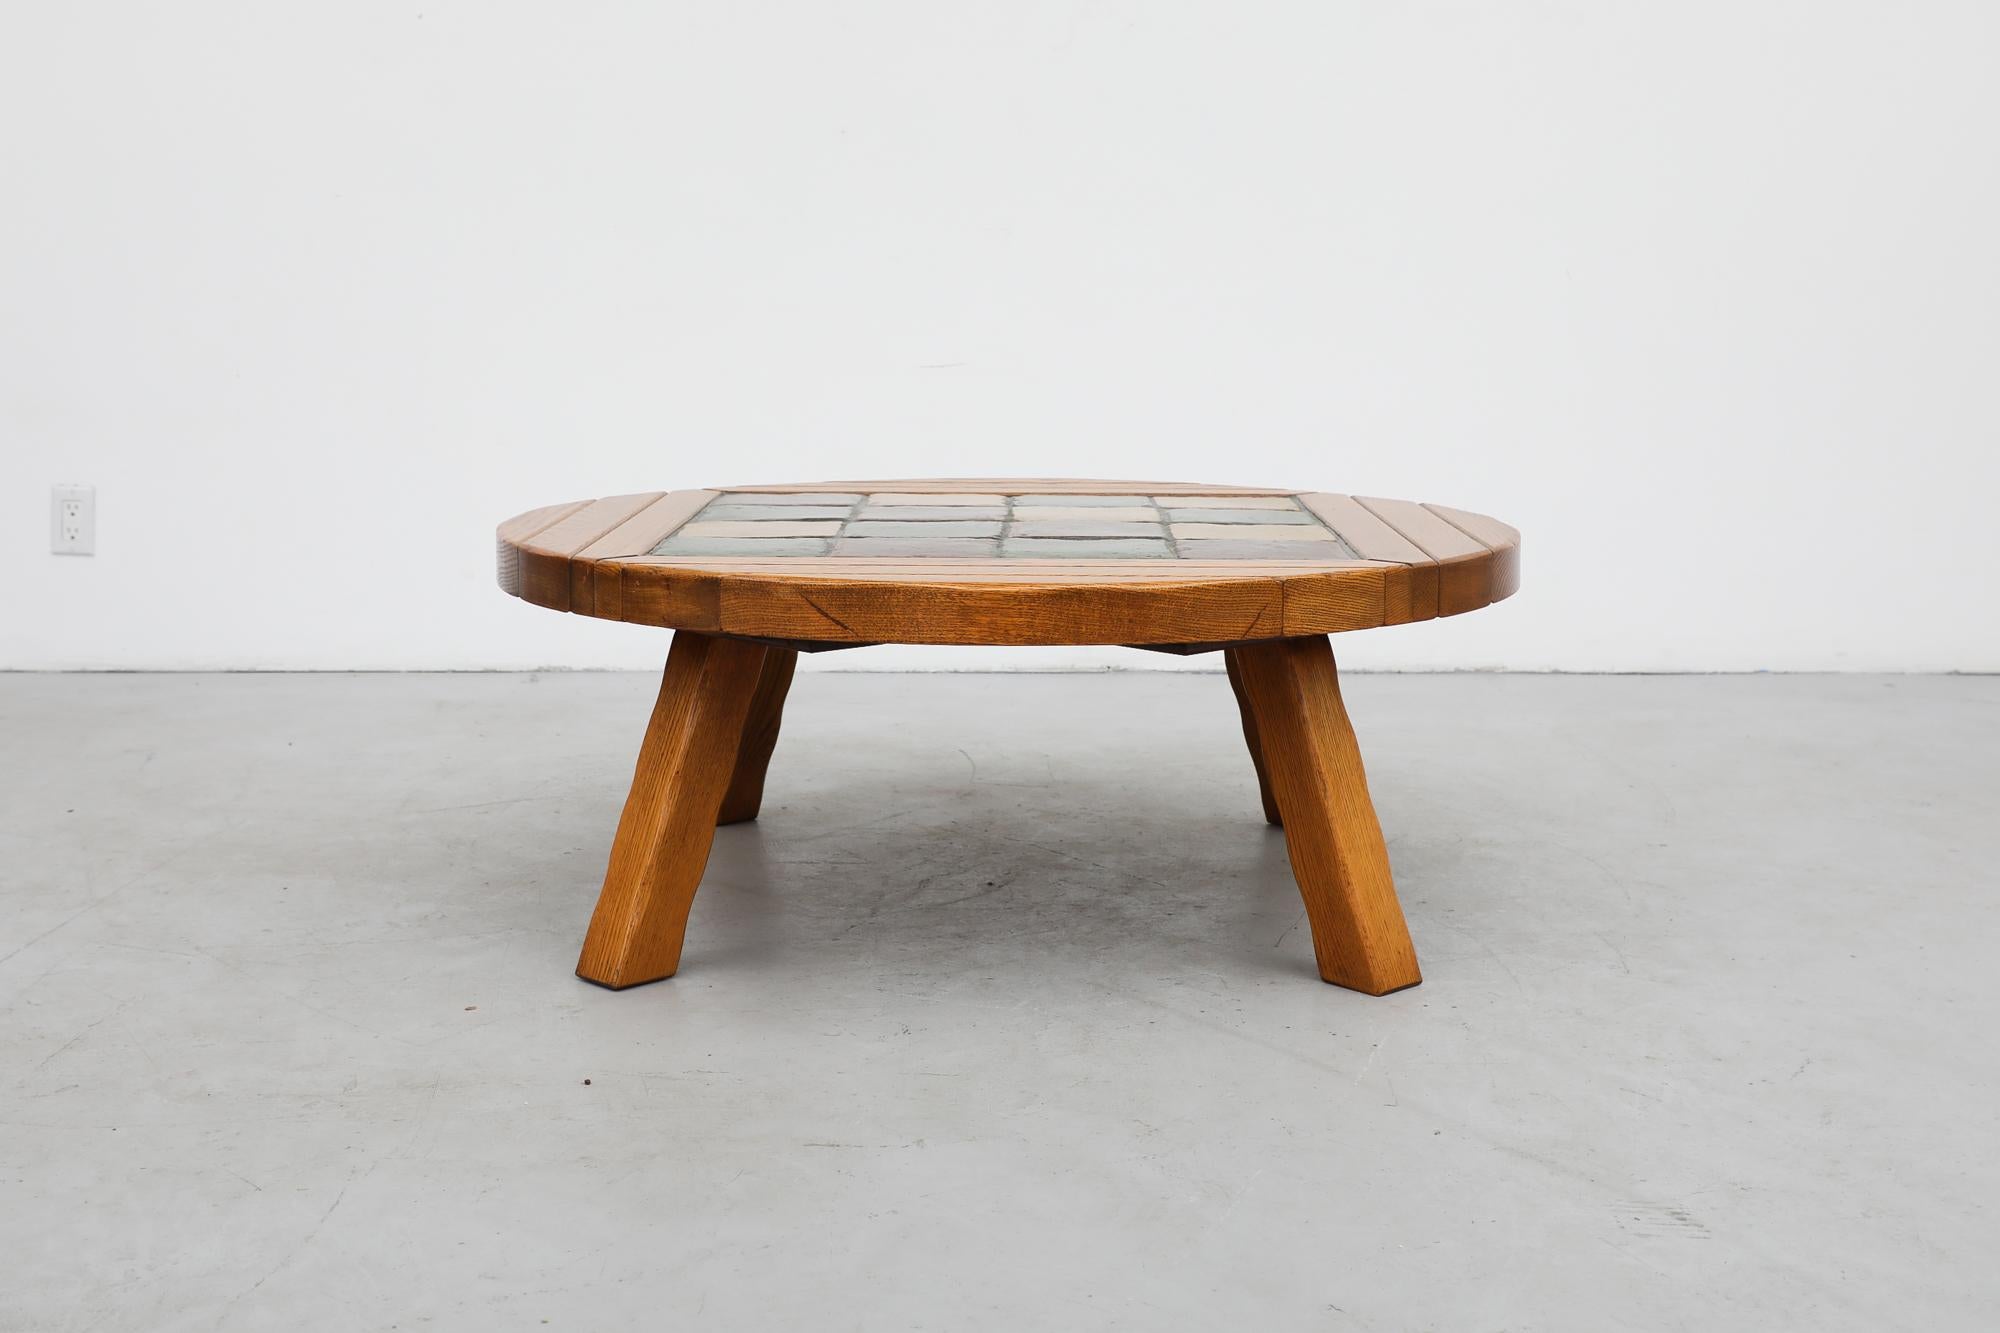 Midcentury round oak coffee table with inset glazed checkered tile top. In the style of Roger Capron and Tue Poulsen. The table is in original condition with visible wear consistent with its age and use.